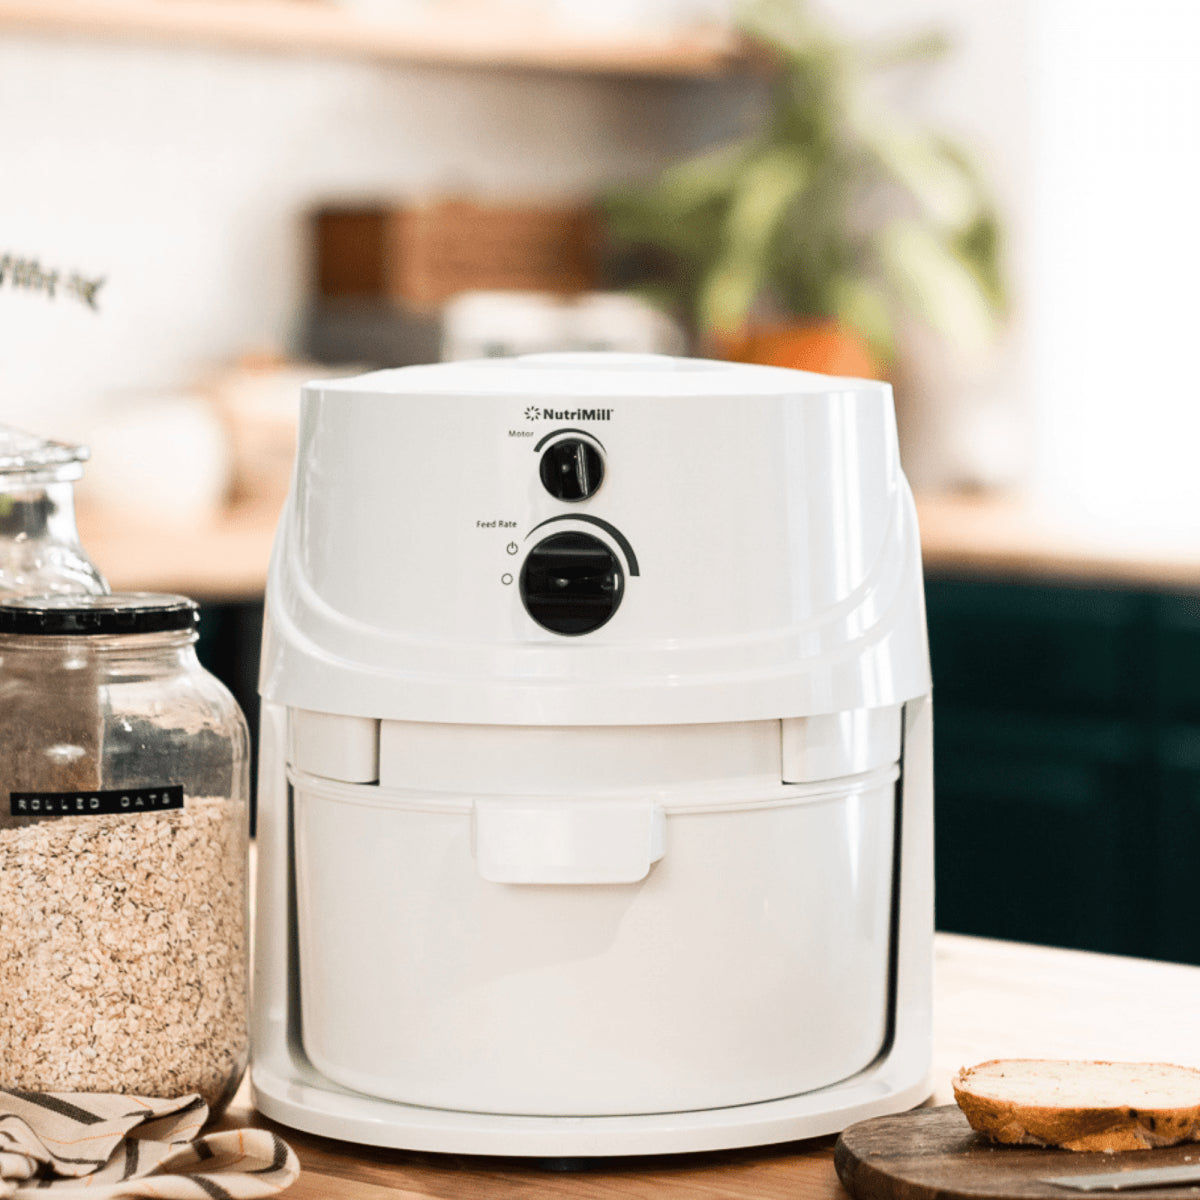 NutriMill Classic grain mill sitting on kitchen counter next to oats